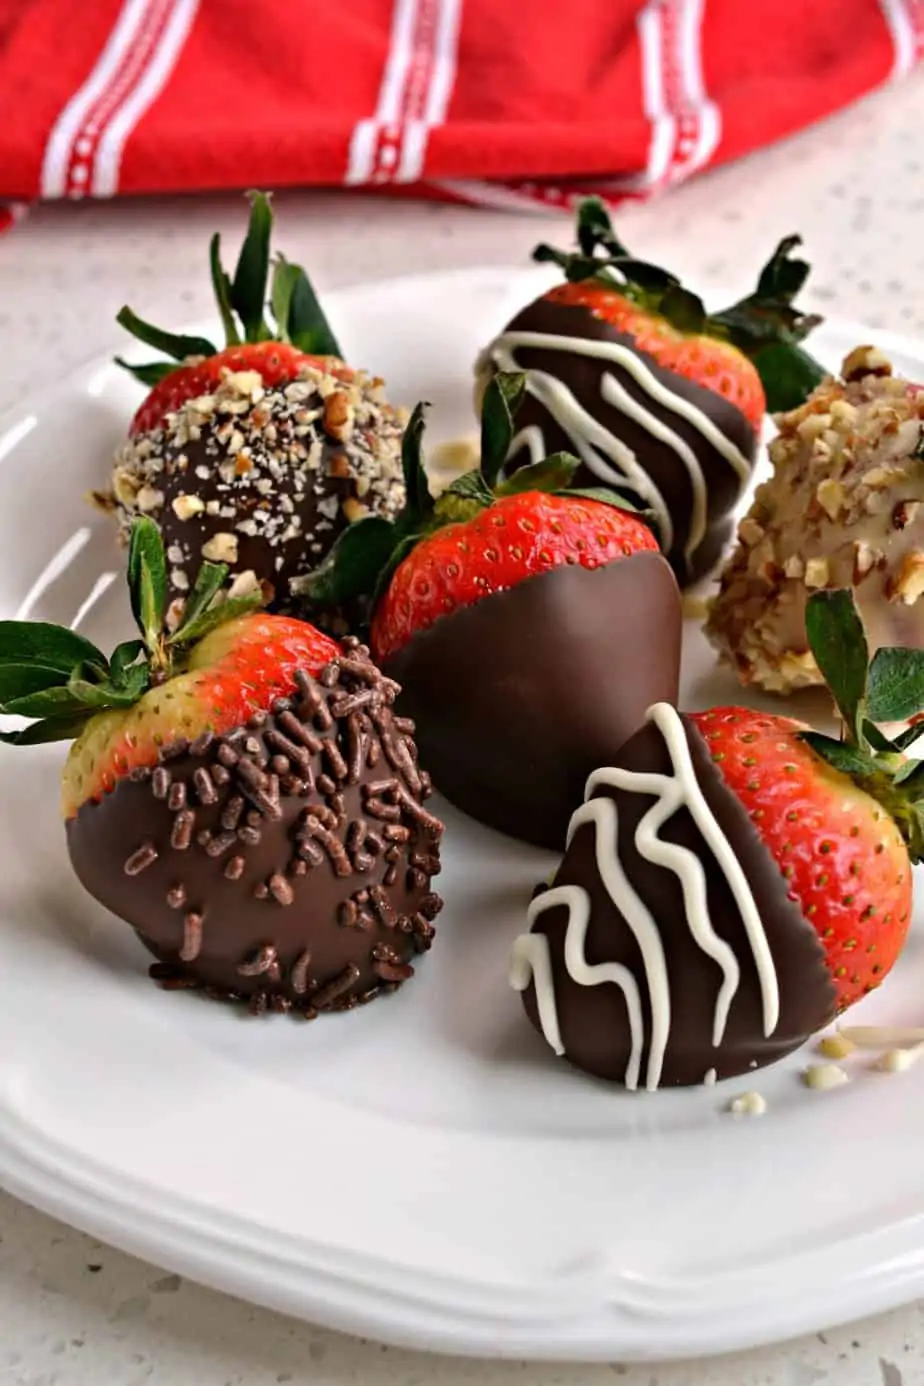 With just a few helpful hints anyone can make this easy Chocolate Covered Strawberry recipe.  